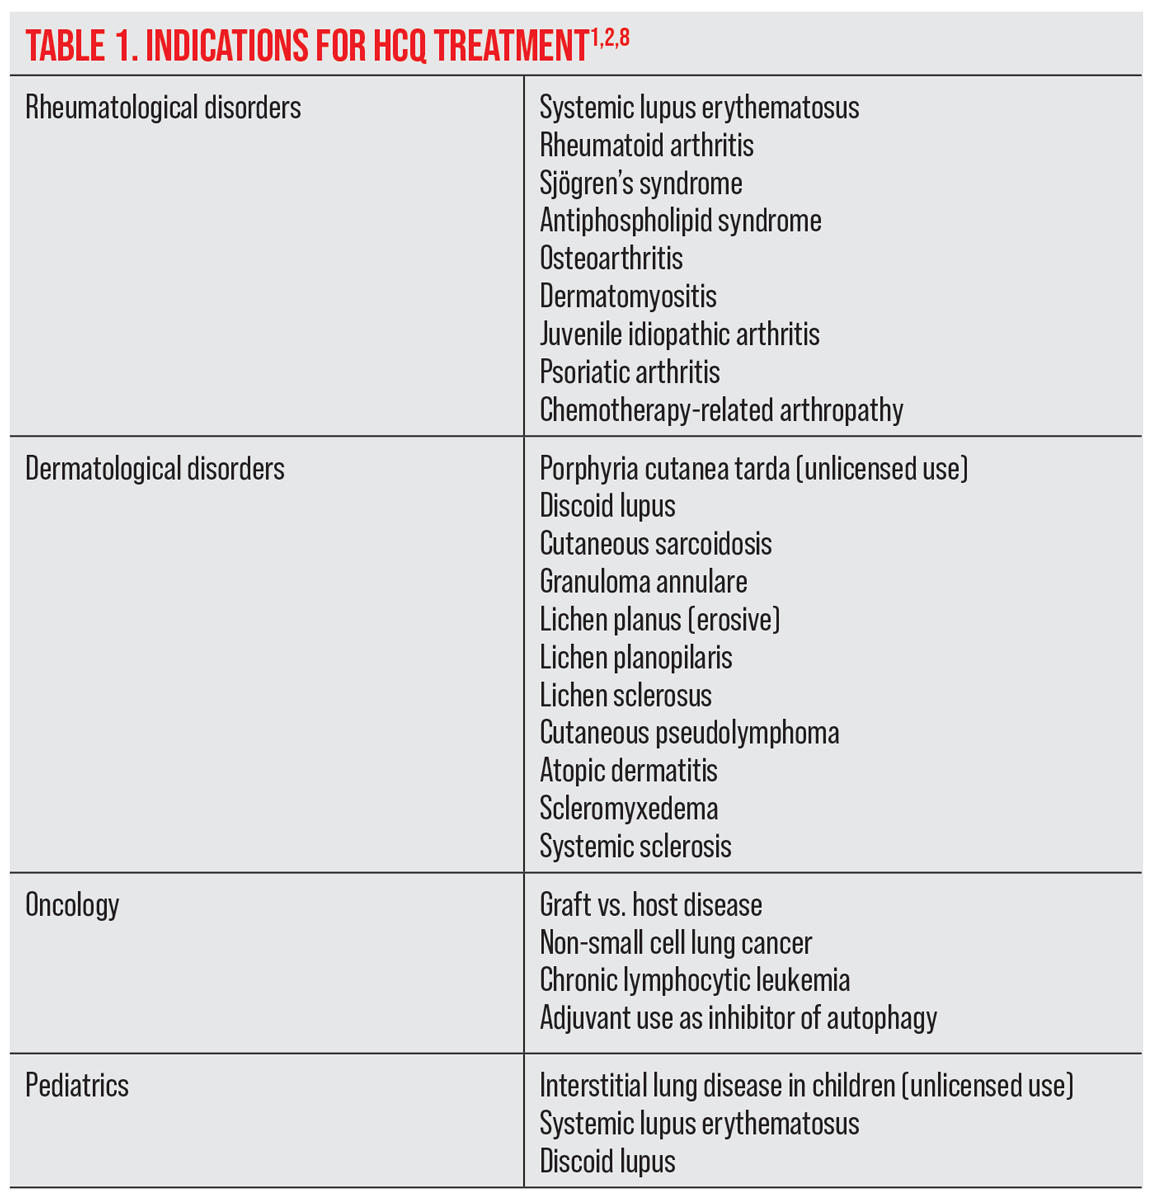 Table 1. Indications for HCQ Treatment